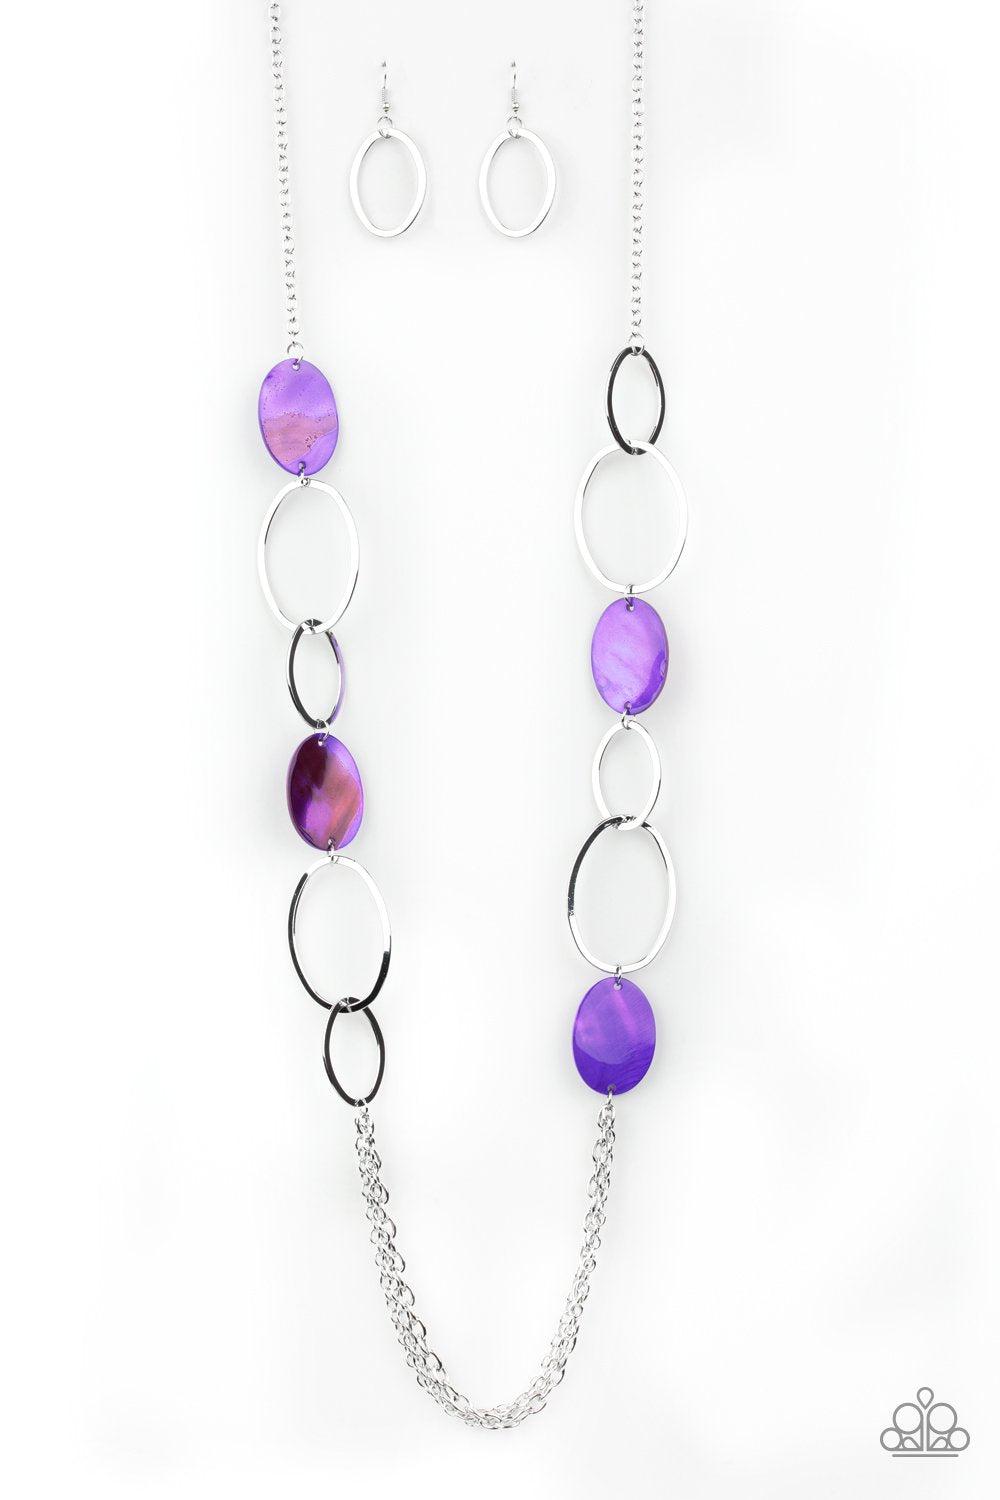 Kaleidoscope Coasts Purple and Silver Necklace - Paparazzi Accessories-CarasShop.com - $5 Jewelry by Cara Jewels